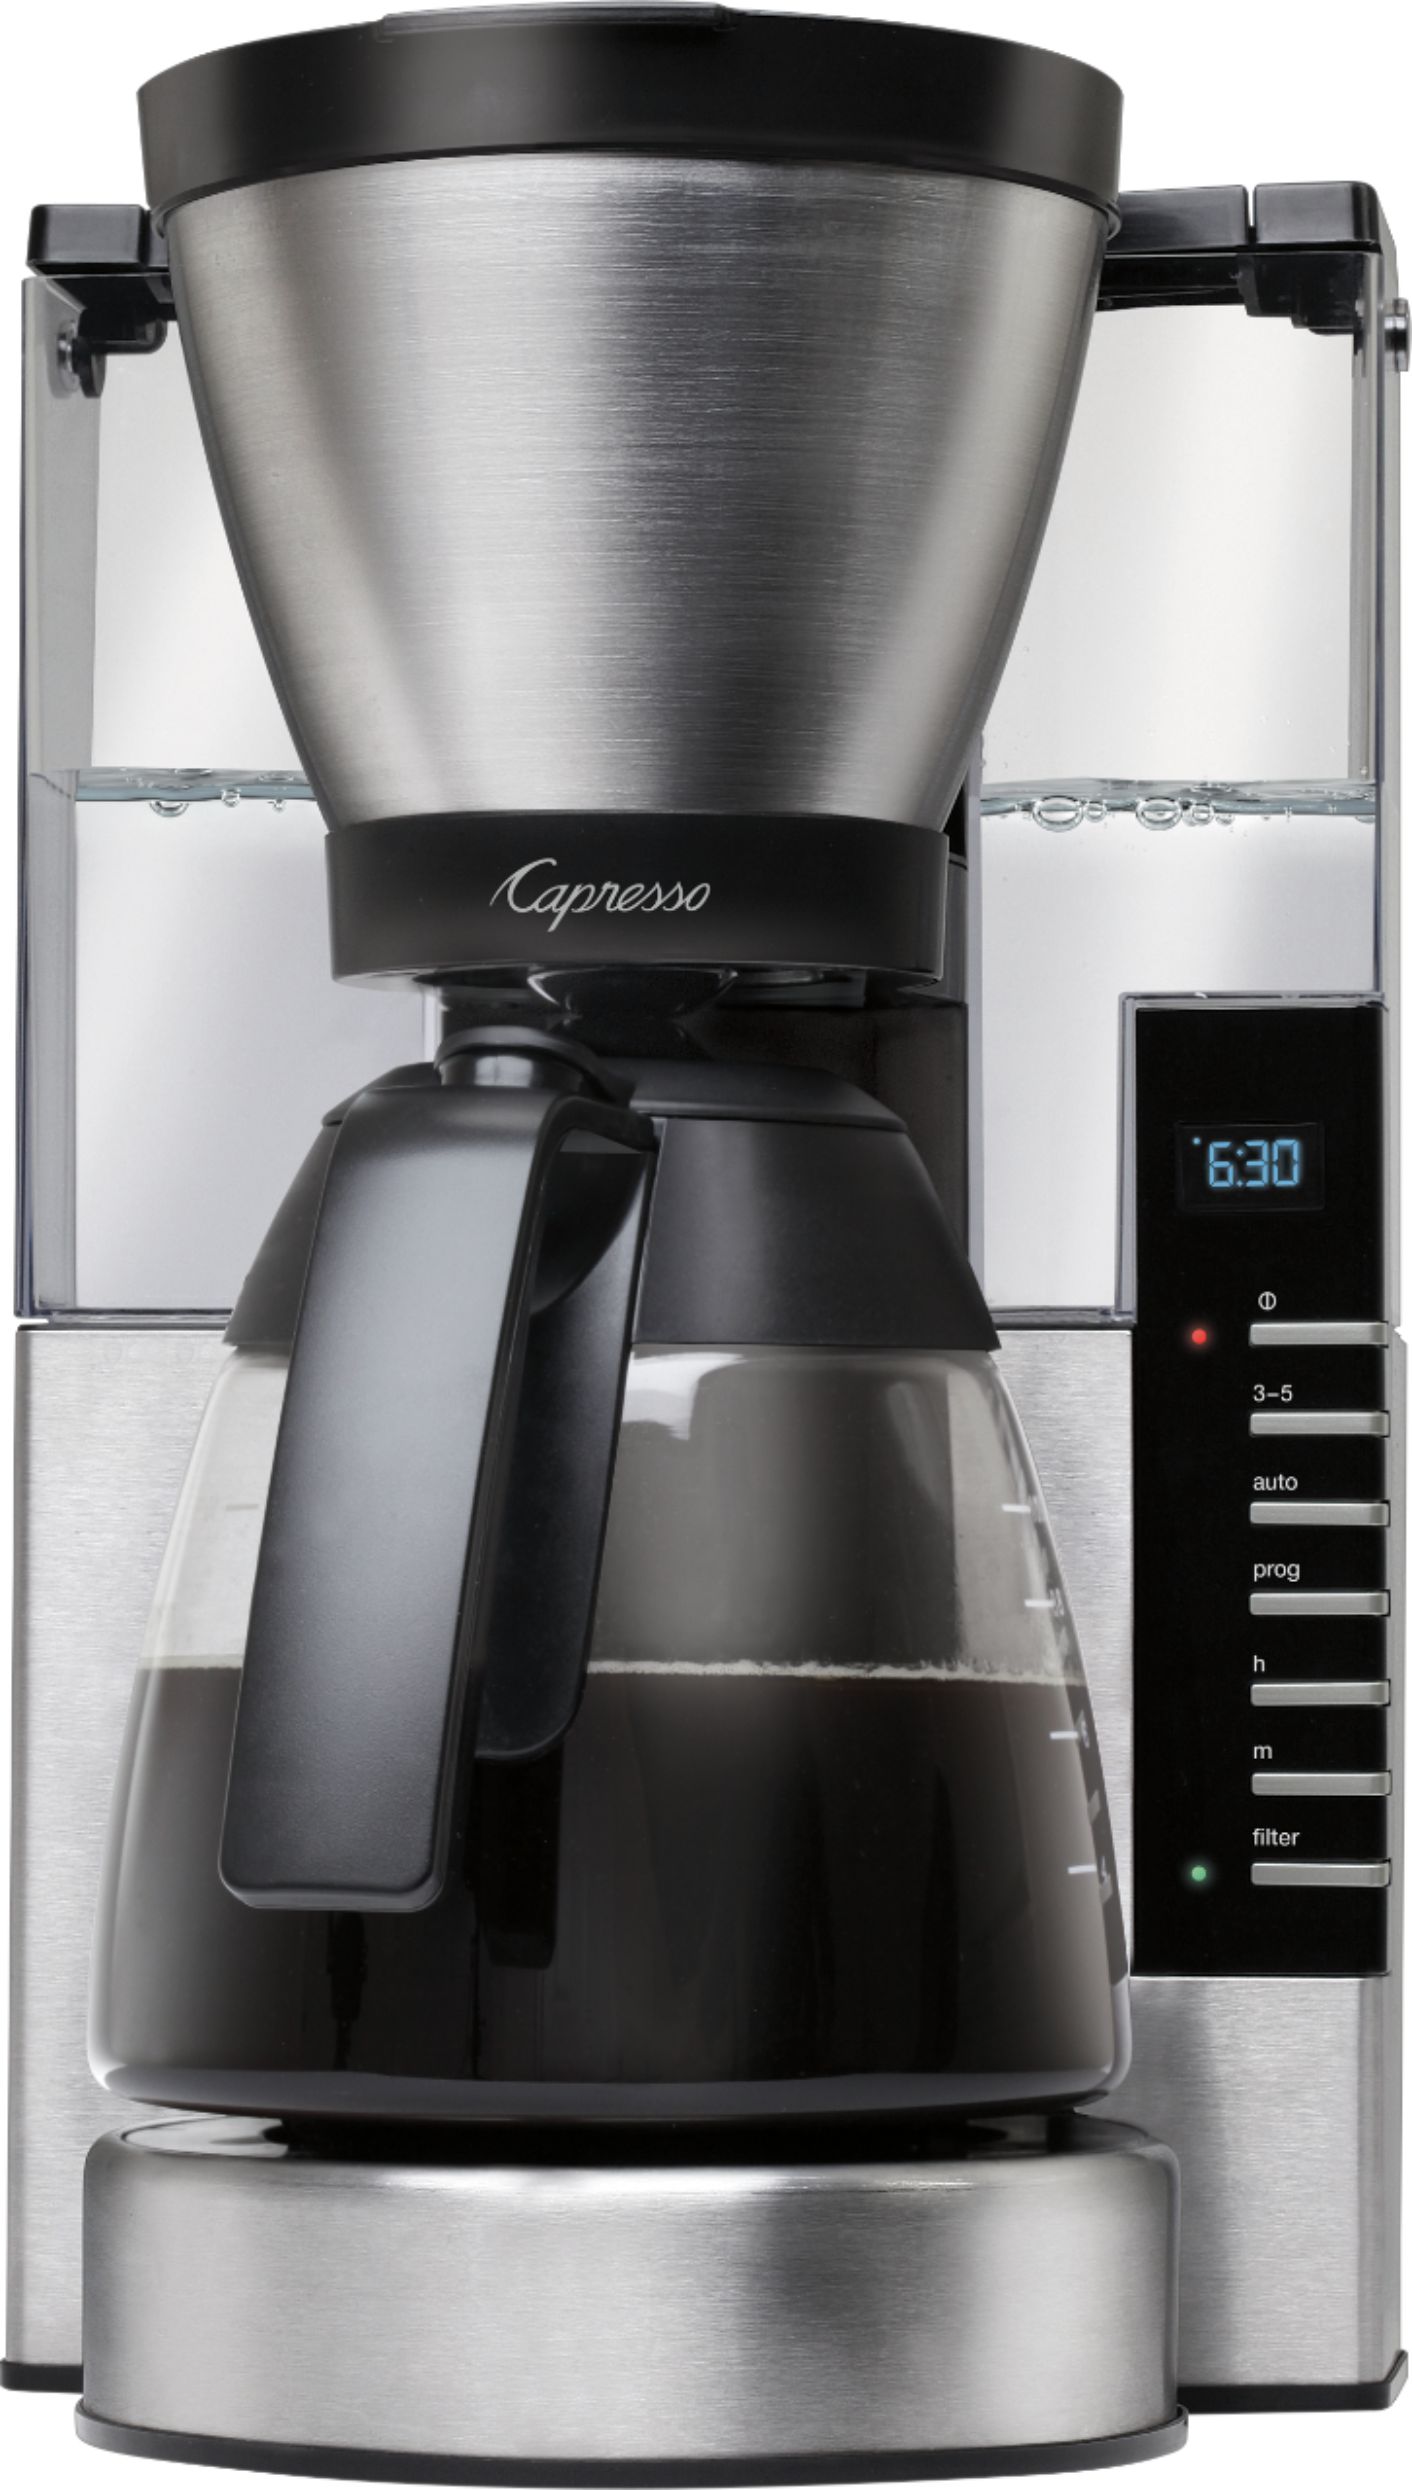 Capresso CM300 10 Cup Coffee Maker & Thermal Carafe, Stainless